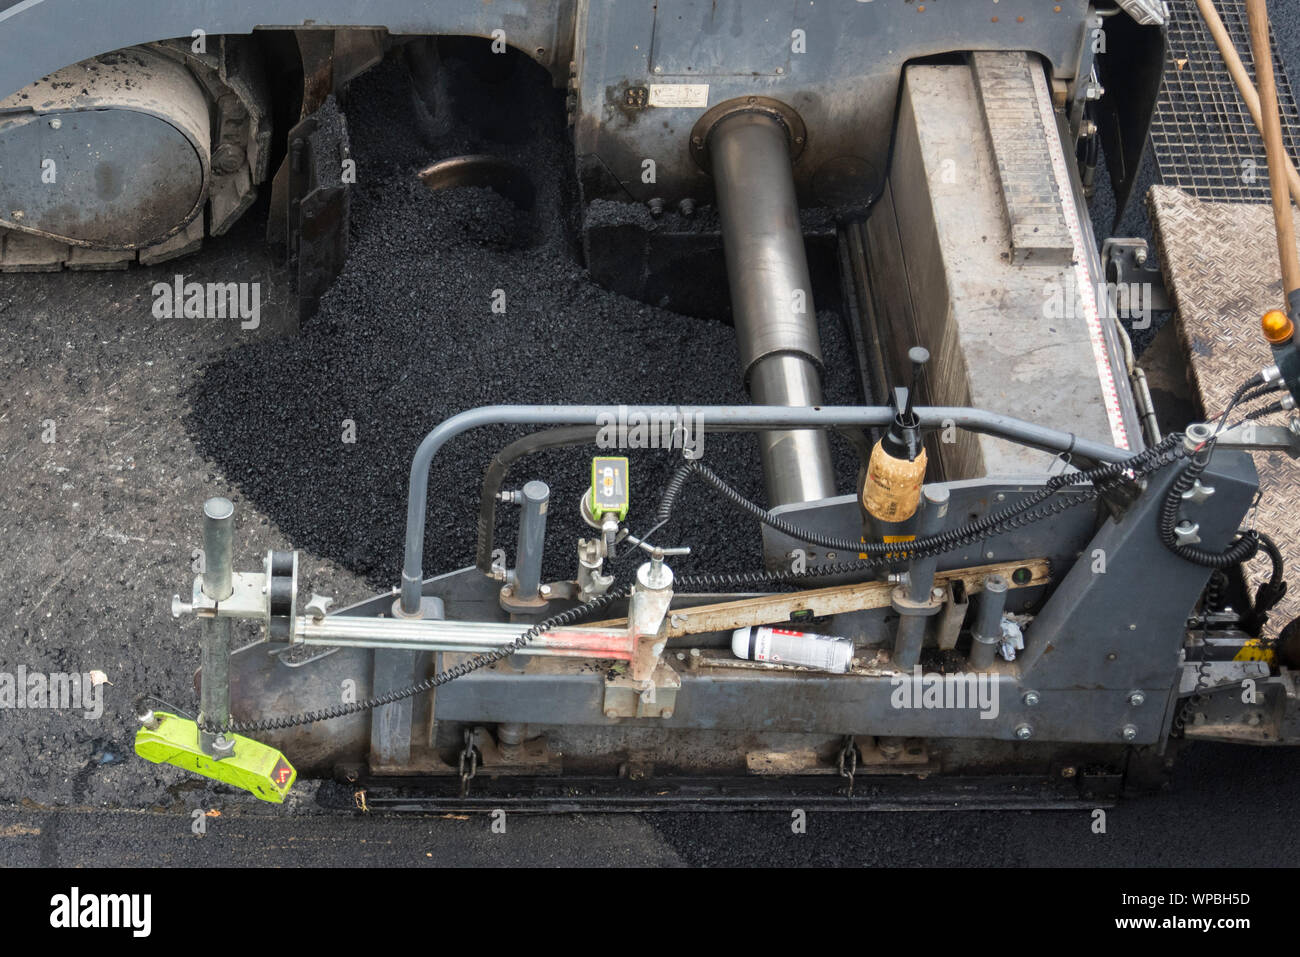 Road works with asphalting new surface Stock Photo